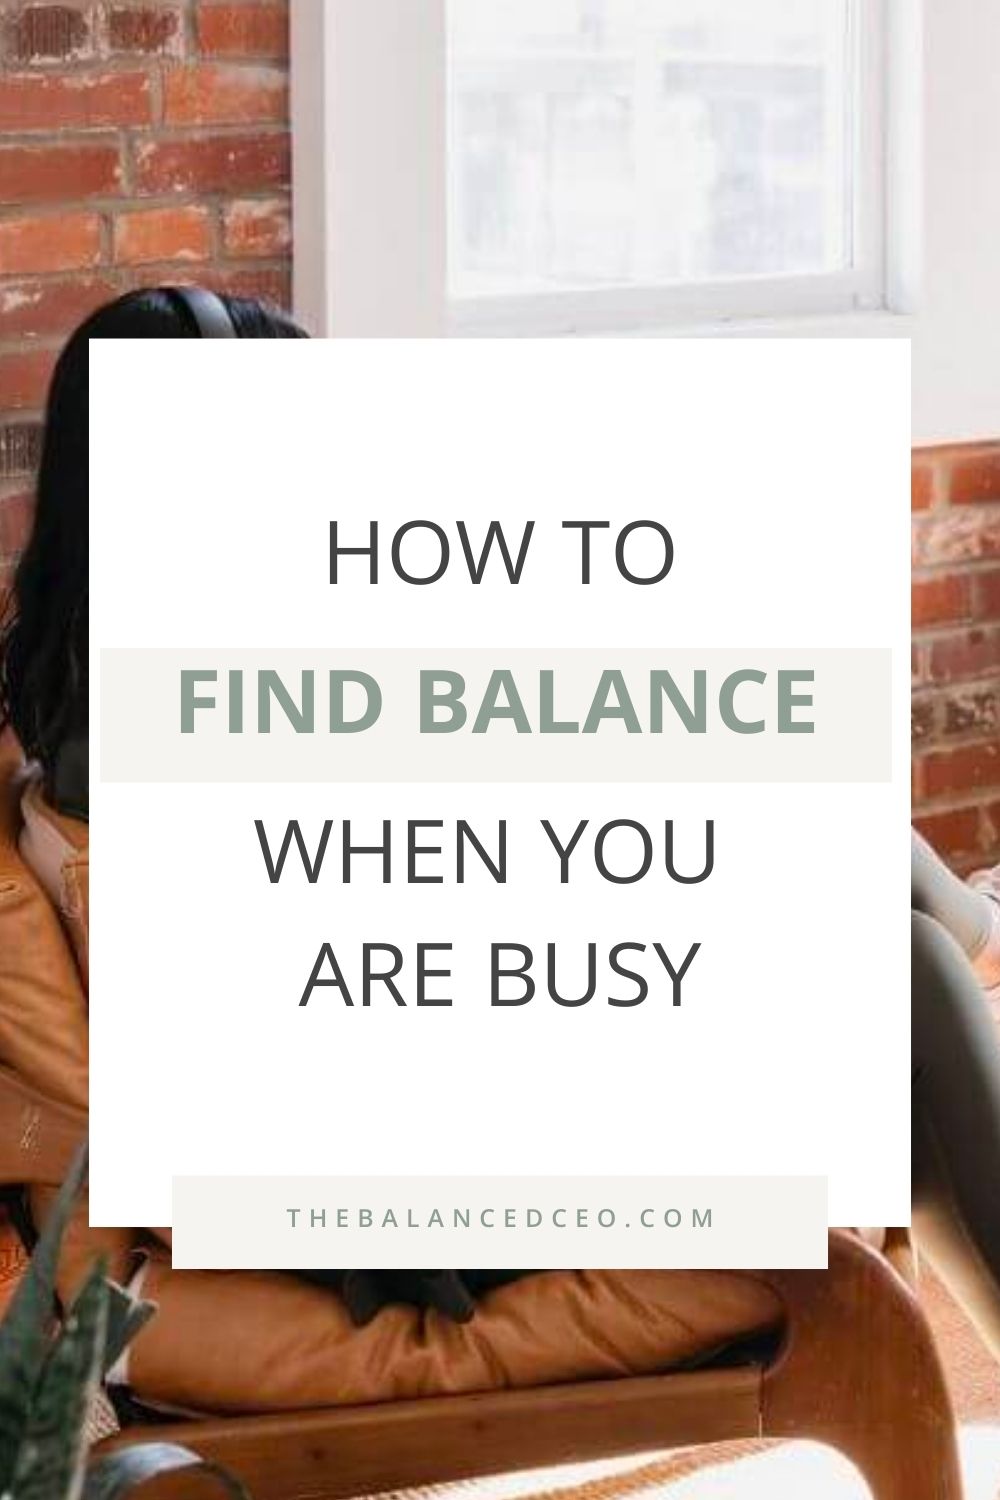 How to Find Balance When You Are Busy